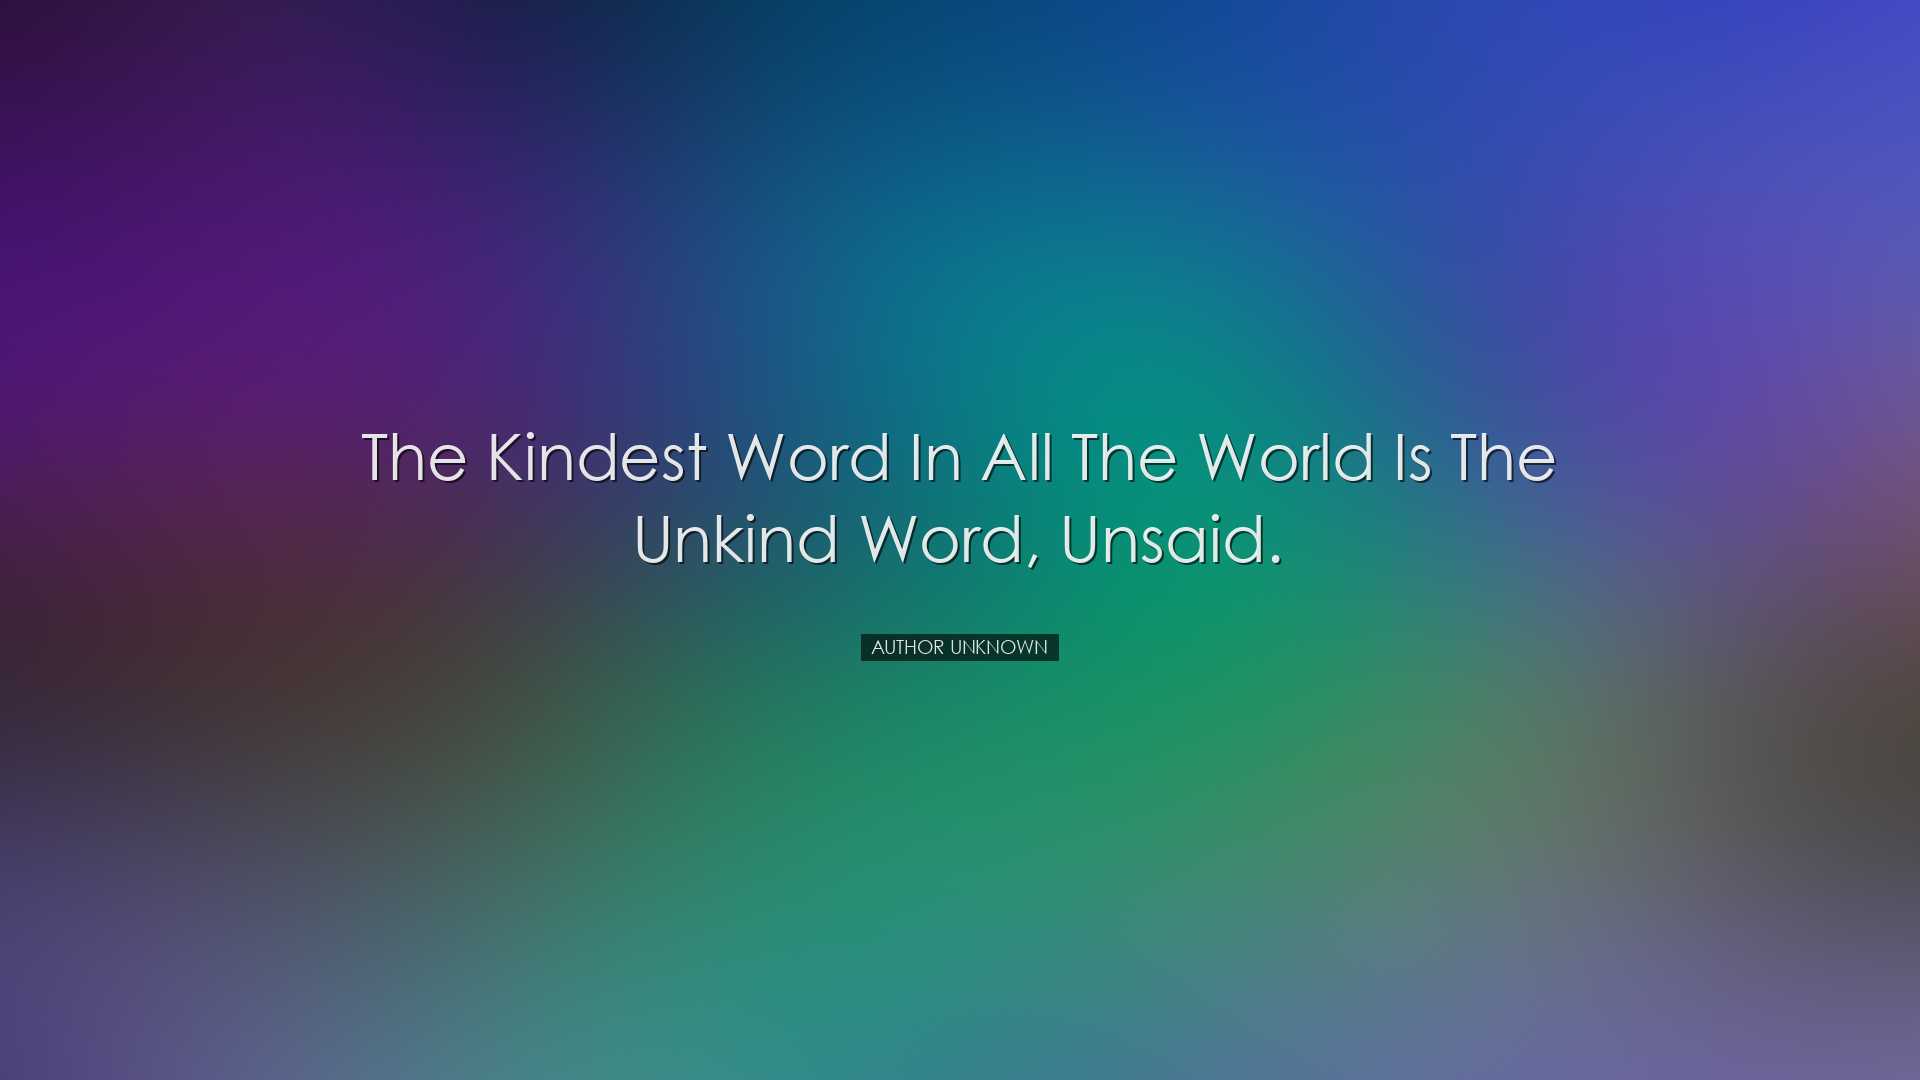 The kindest word in all the world is the unkind word, unsaid. - Au